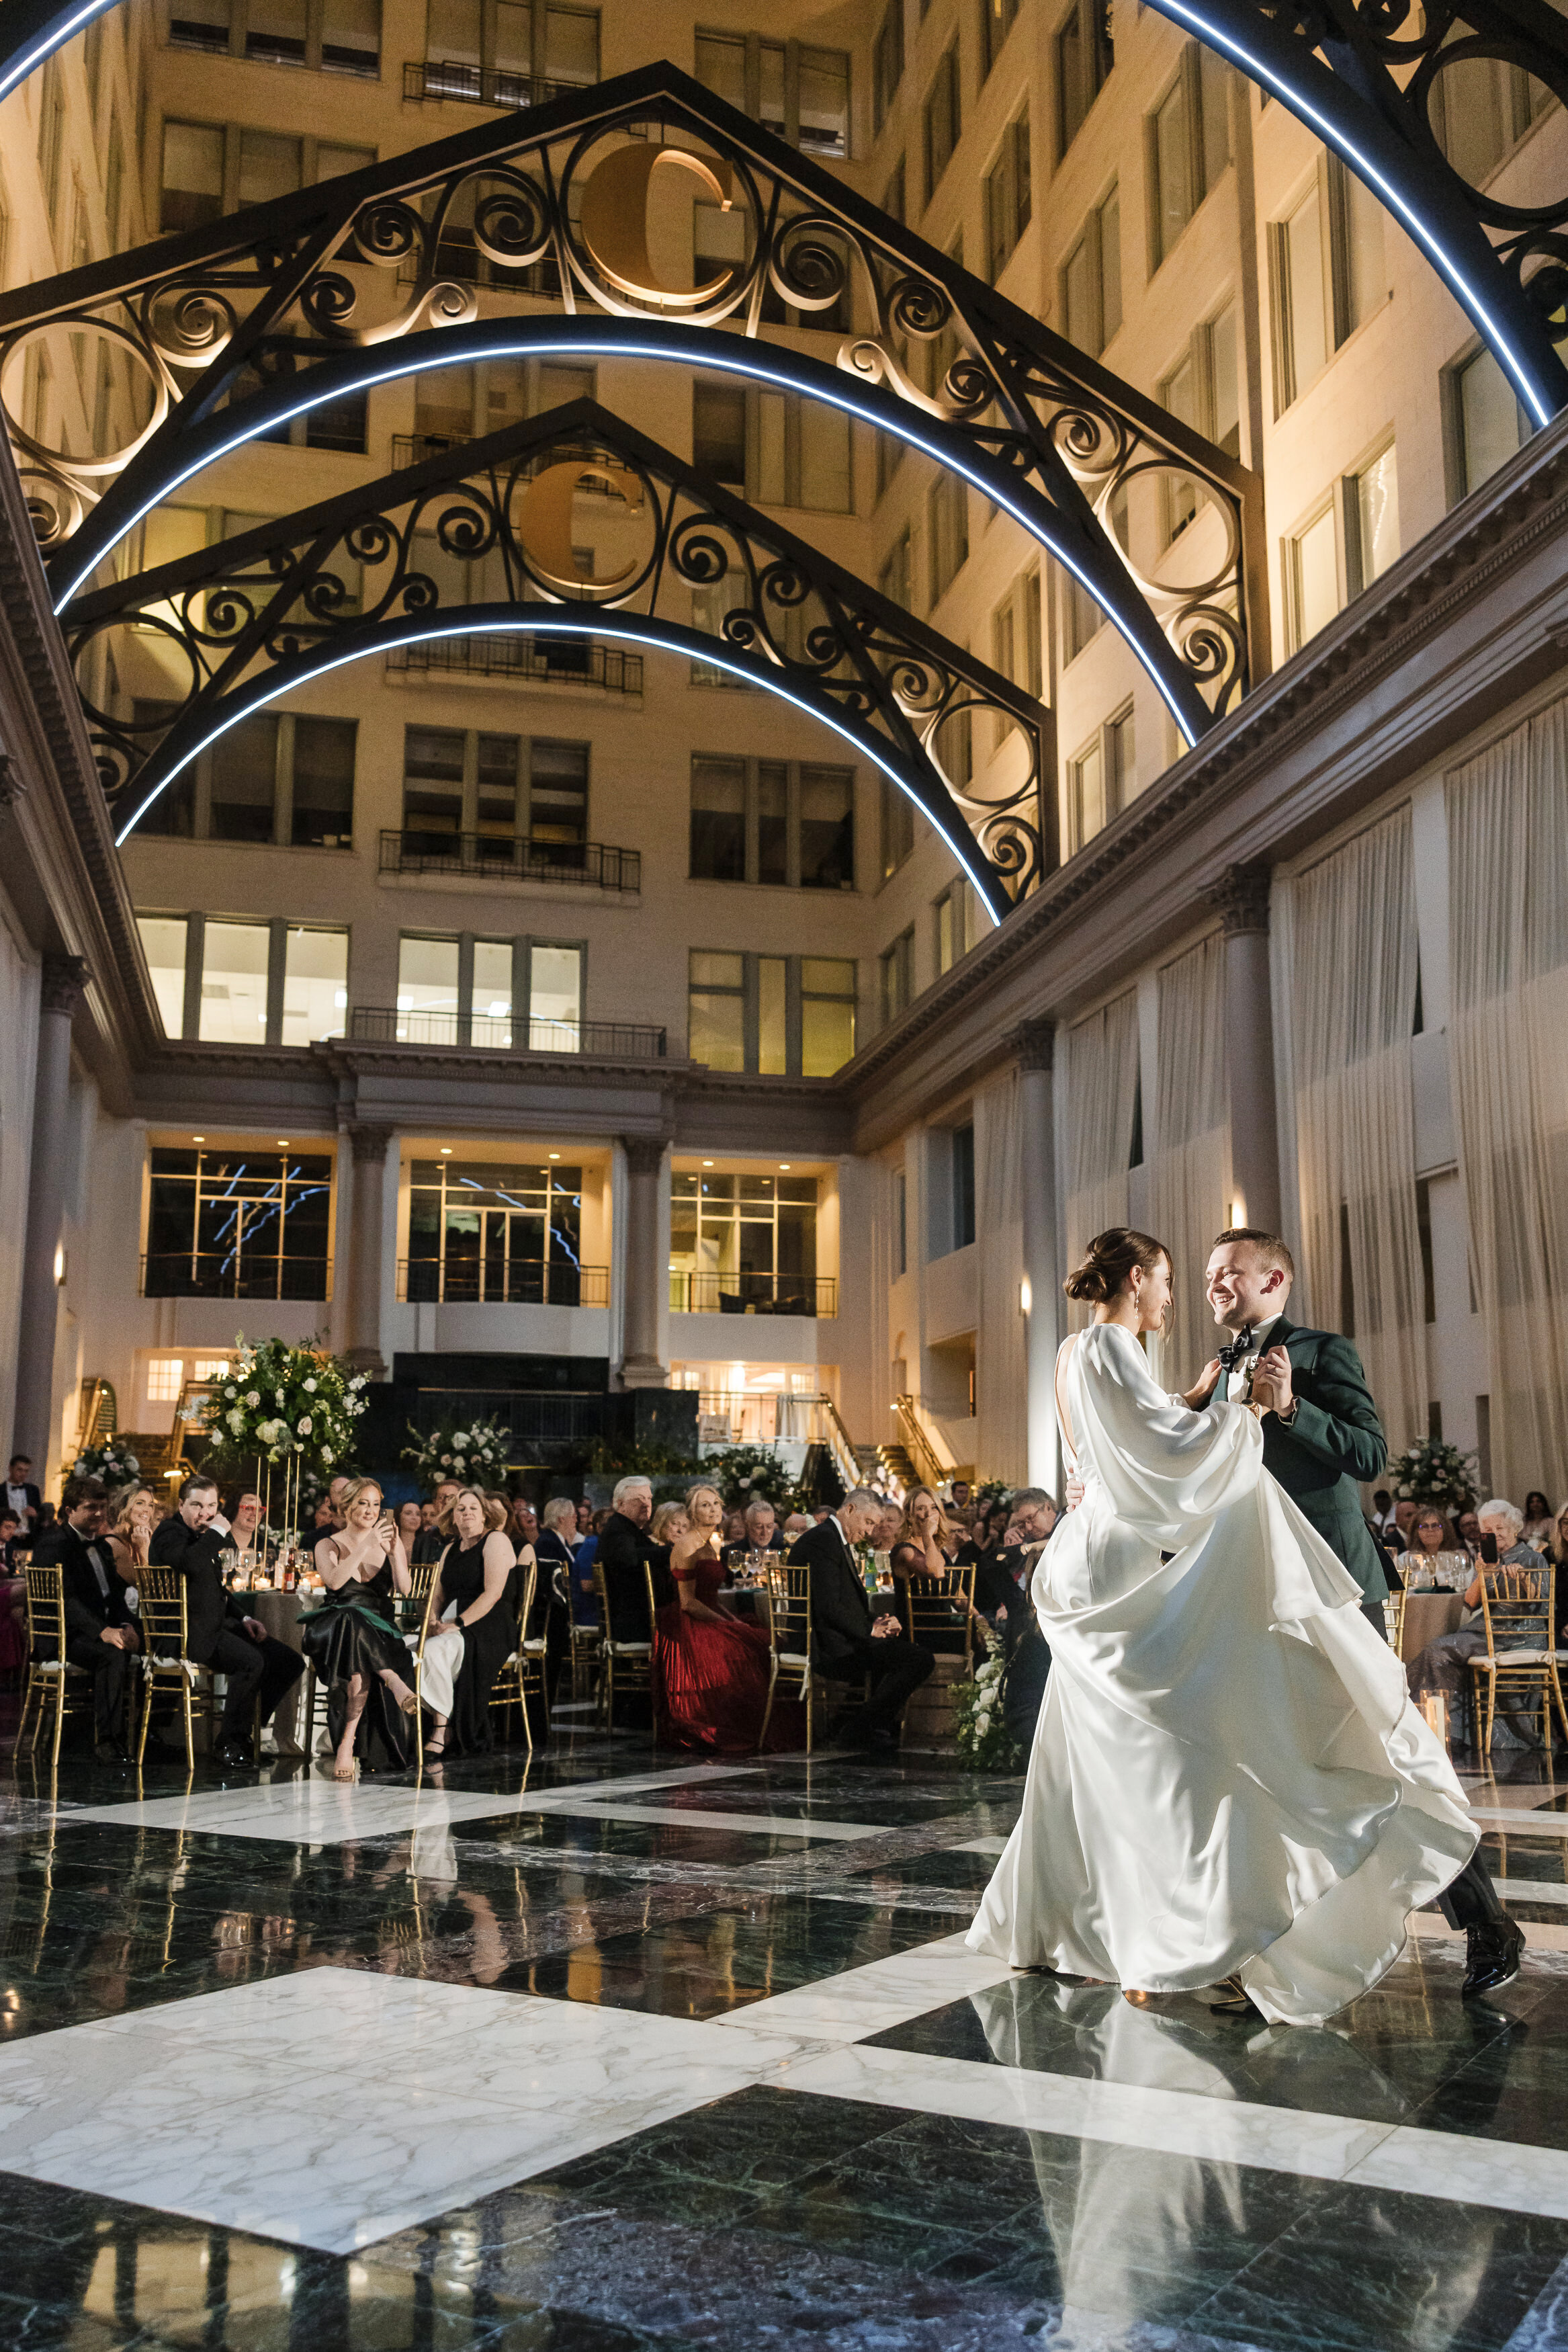 First dance of the bride and groom at their wedding reception at Curtis Atrium Philly wedding.